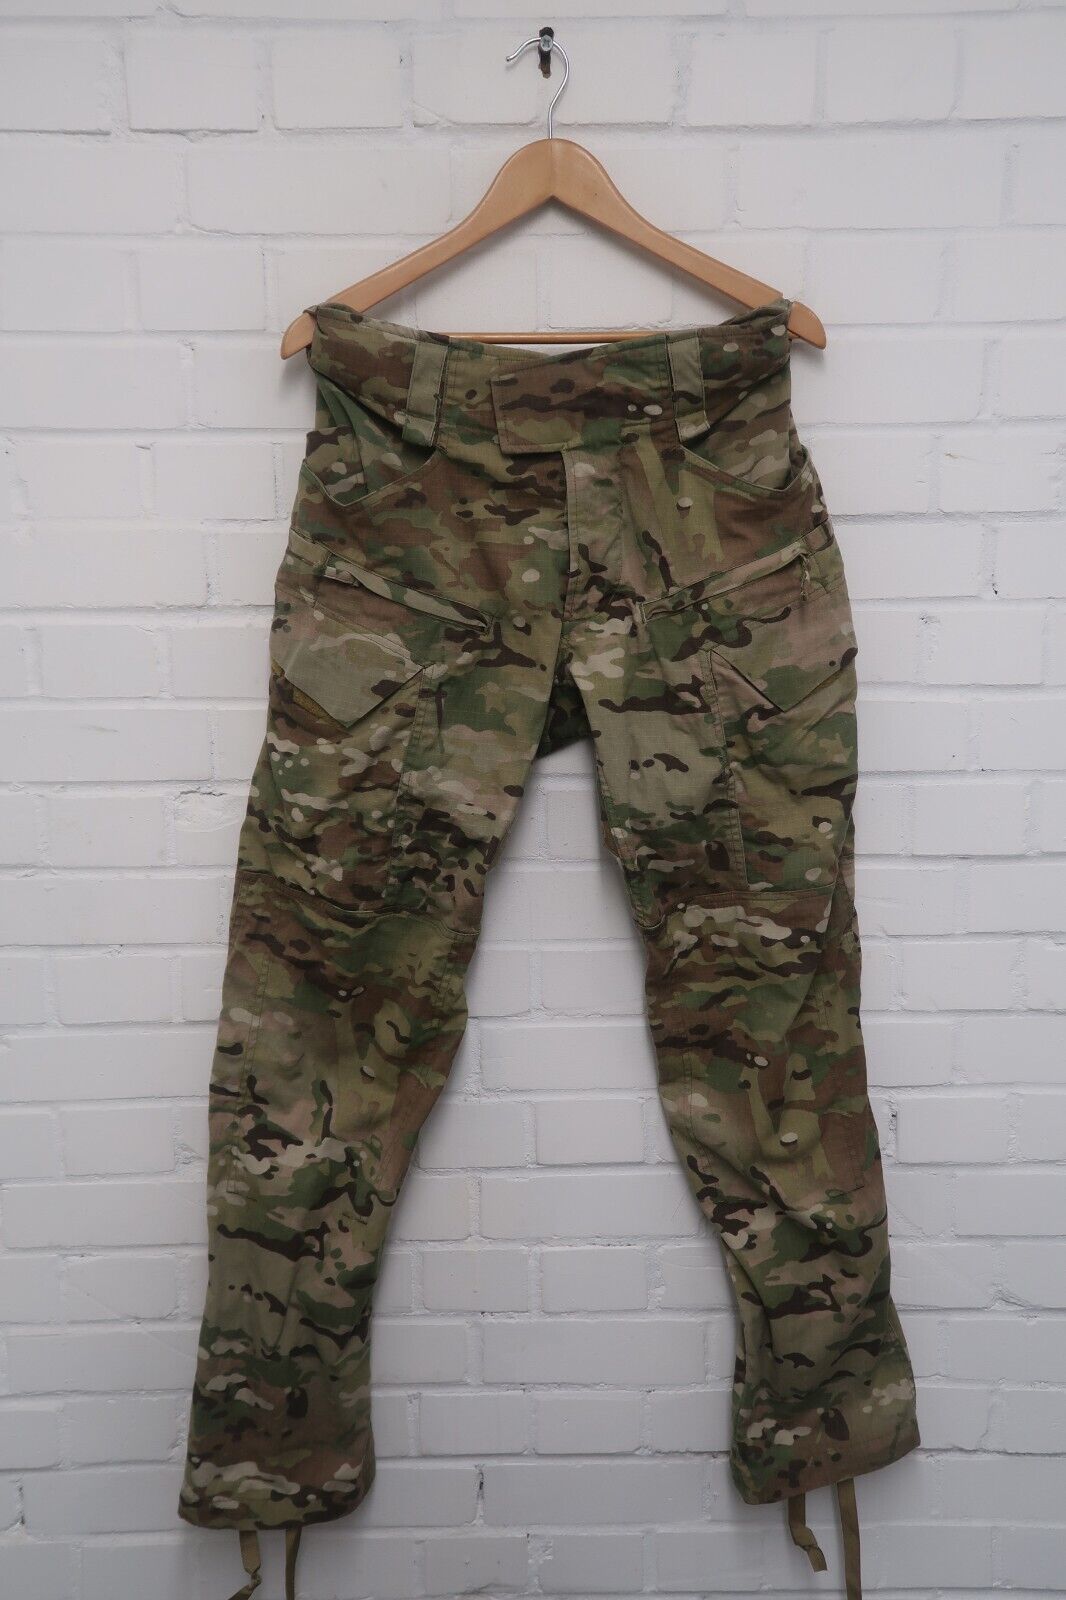 Crye Precision Field Pant Trousers, 32 Regular Nspa G4 MTP Camo Army DEFECT